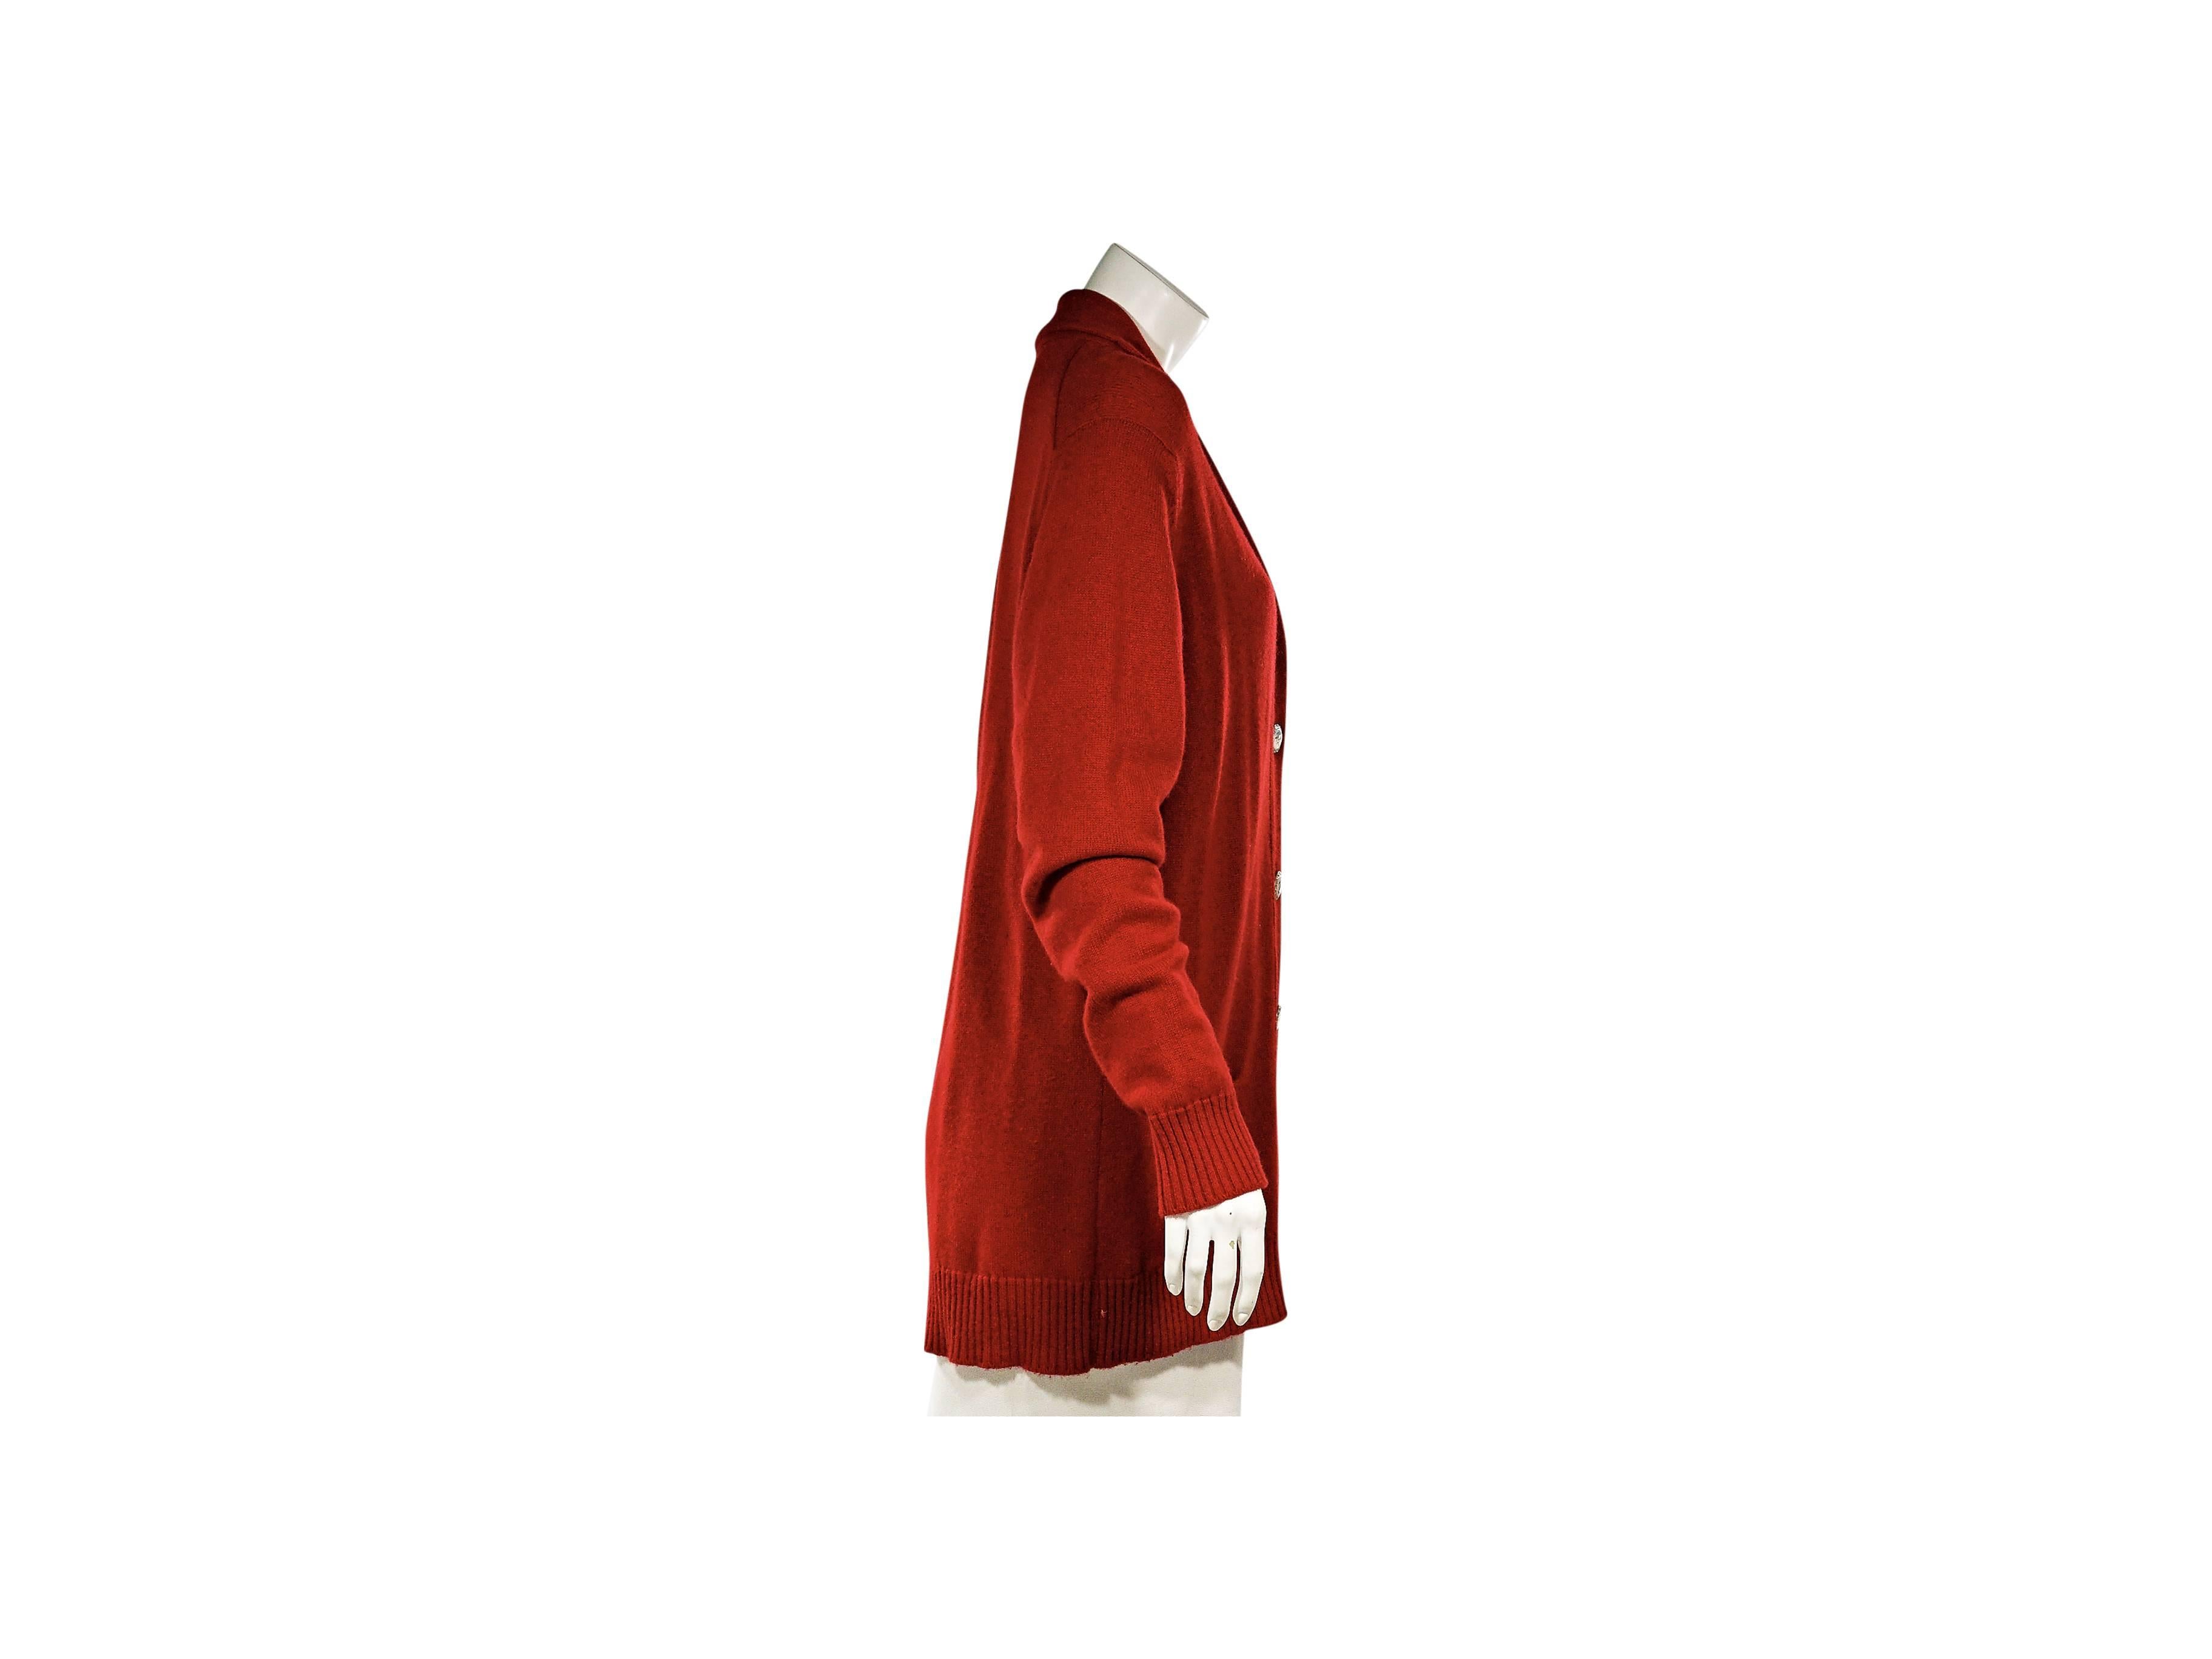 Product details:  ﻿Red oversized cashmere cardigan by Chanel.  Long sleeves.  Shawl collar.  Button-front closure.  Front patch pockets.  Ribbed cuffs and hemline.  
Condition: Excellent. 